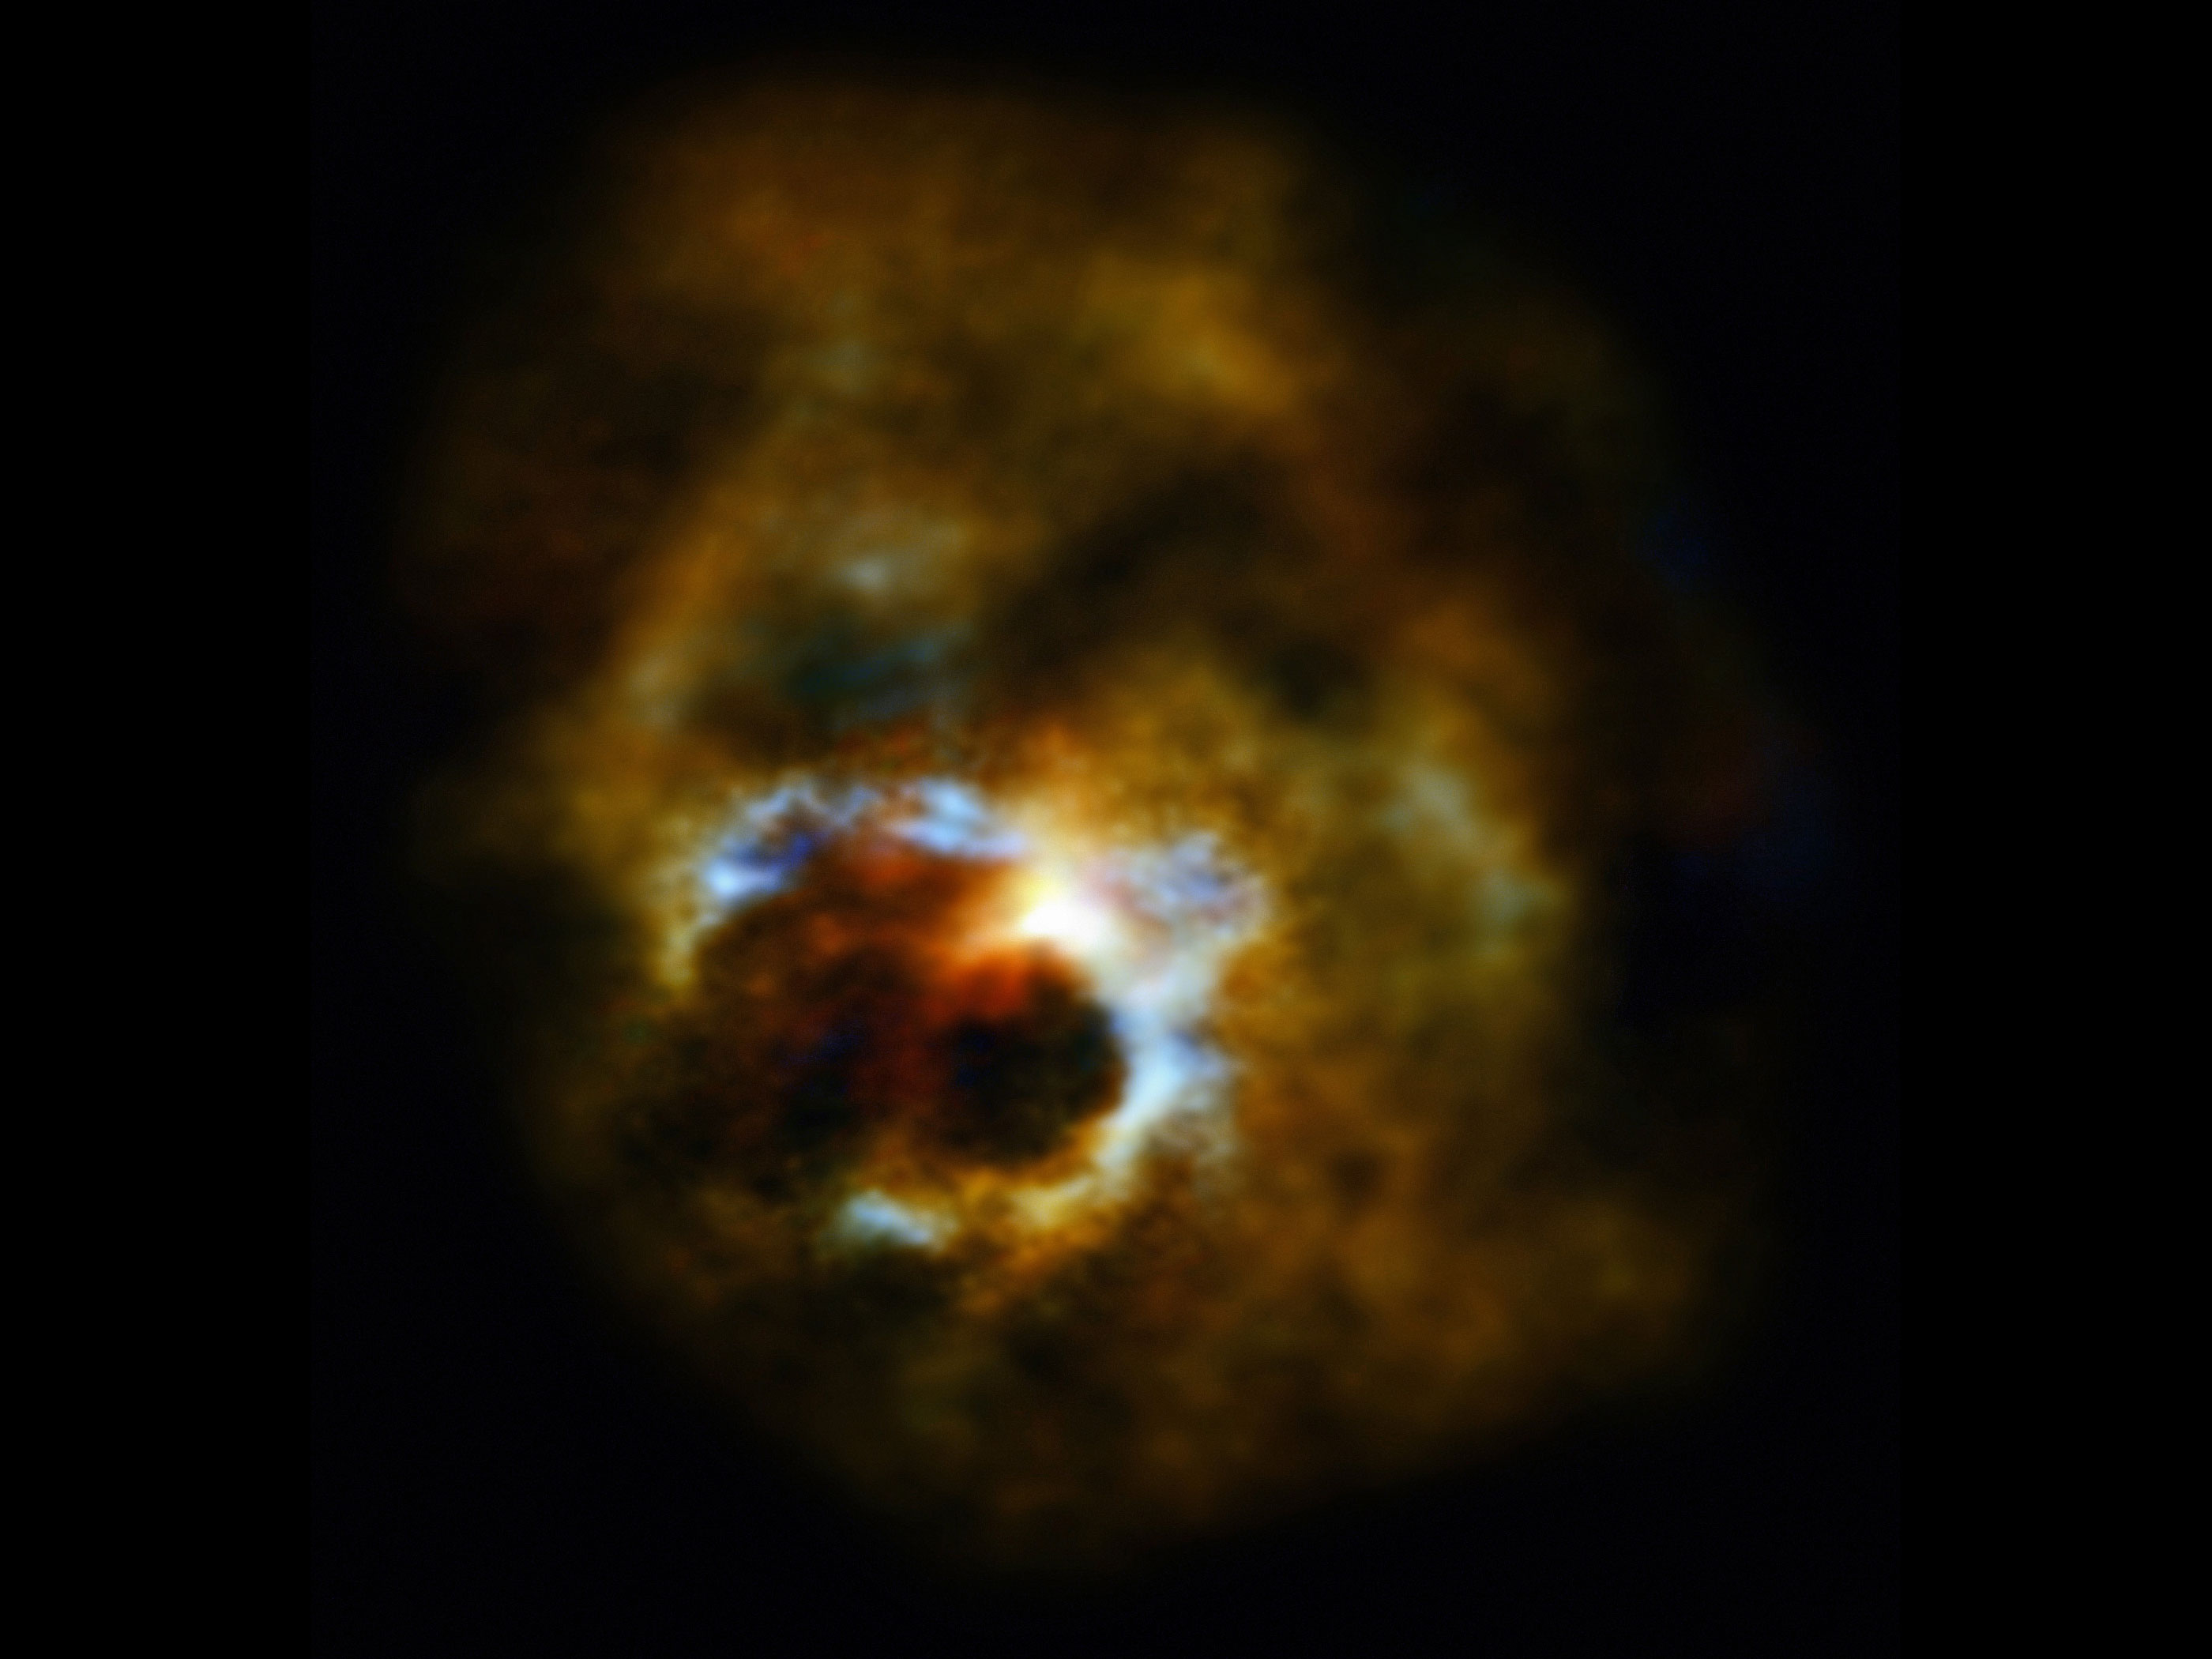 <span style='font-size:16px;position:relative;top:-50px'>[Credit: ESO/S. Ramstedt (Uppsala University, Sweden) & W. Vlemmings (Chalmers University of Technology, Sweden)](https://alma-telescope.jp/news/mt-post_575)</span>